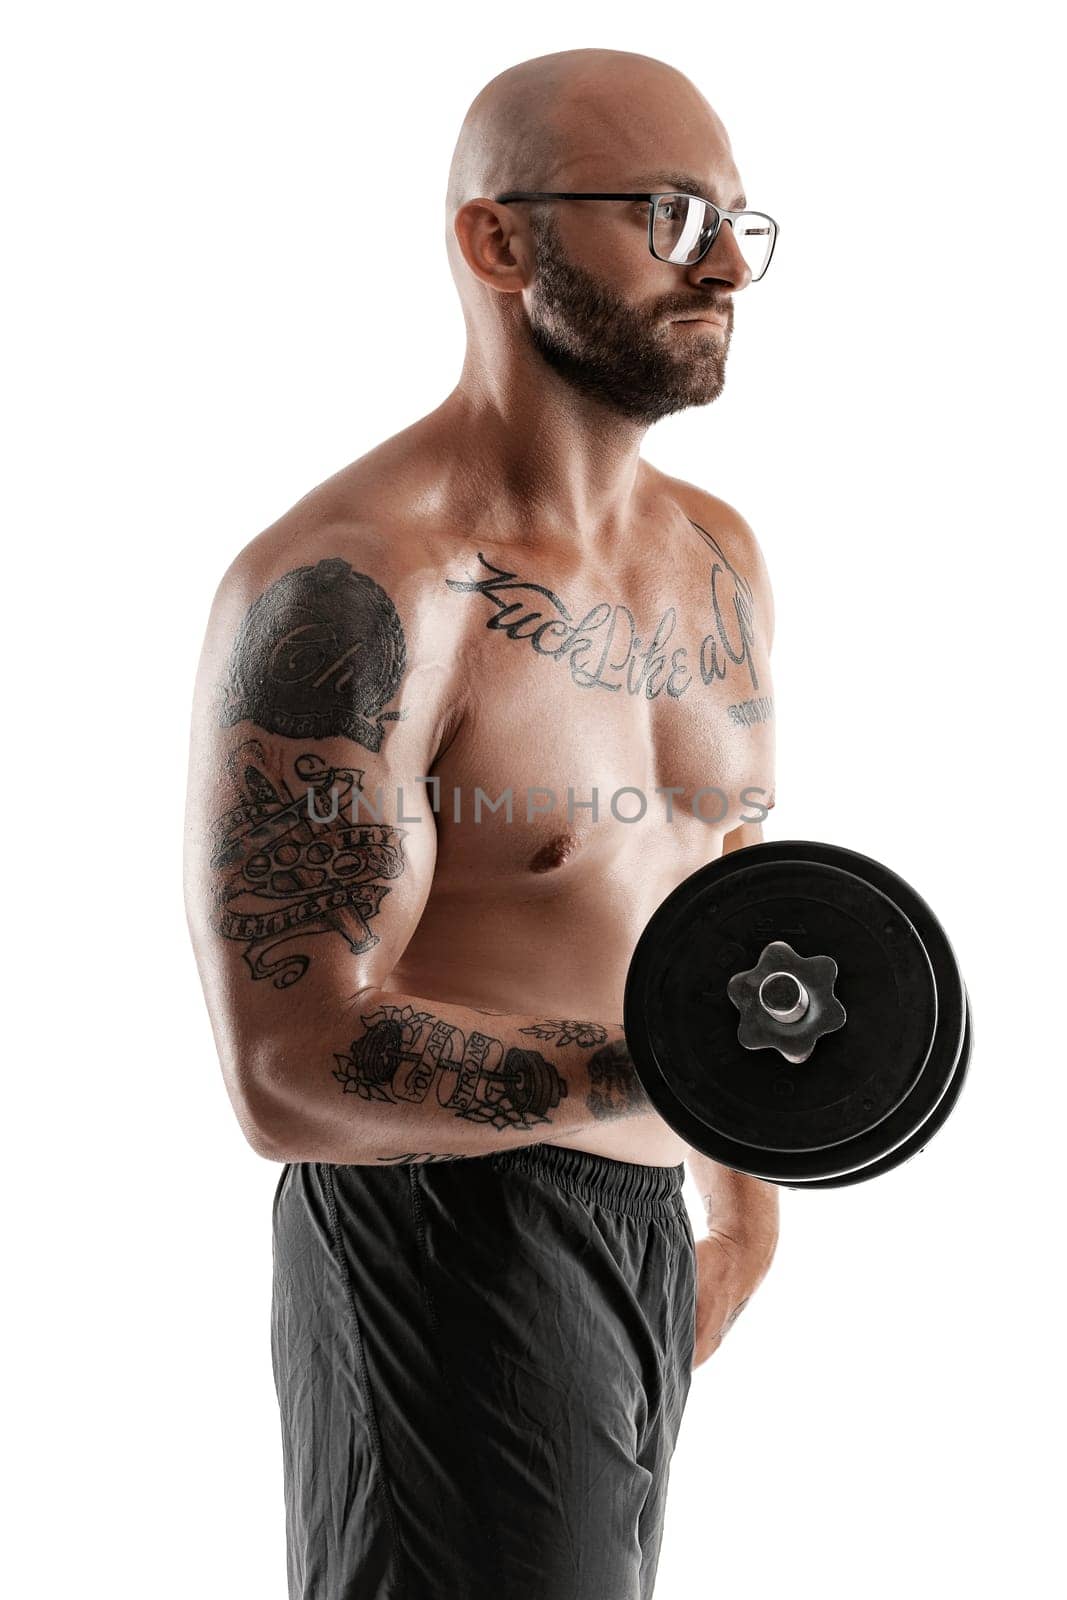 Handsome bald, bearded, tattooed fellow in glasses, black shorts is posing holding a dumbbell in his hand isolated on white background and looking away. Chic muscular body, fitness, gym, healthy lifestyle concept. Close-up portrait.